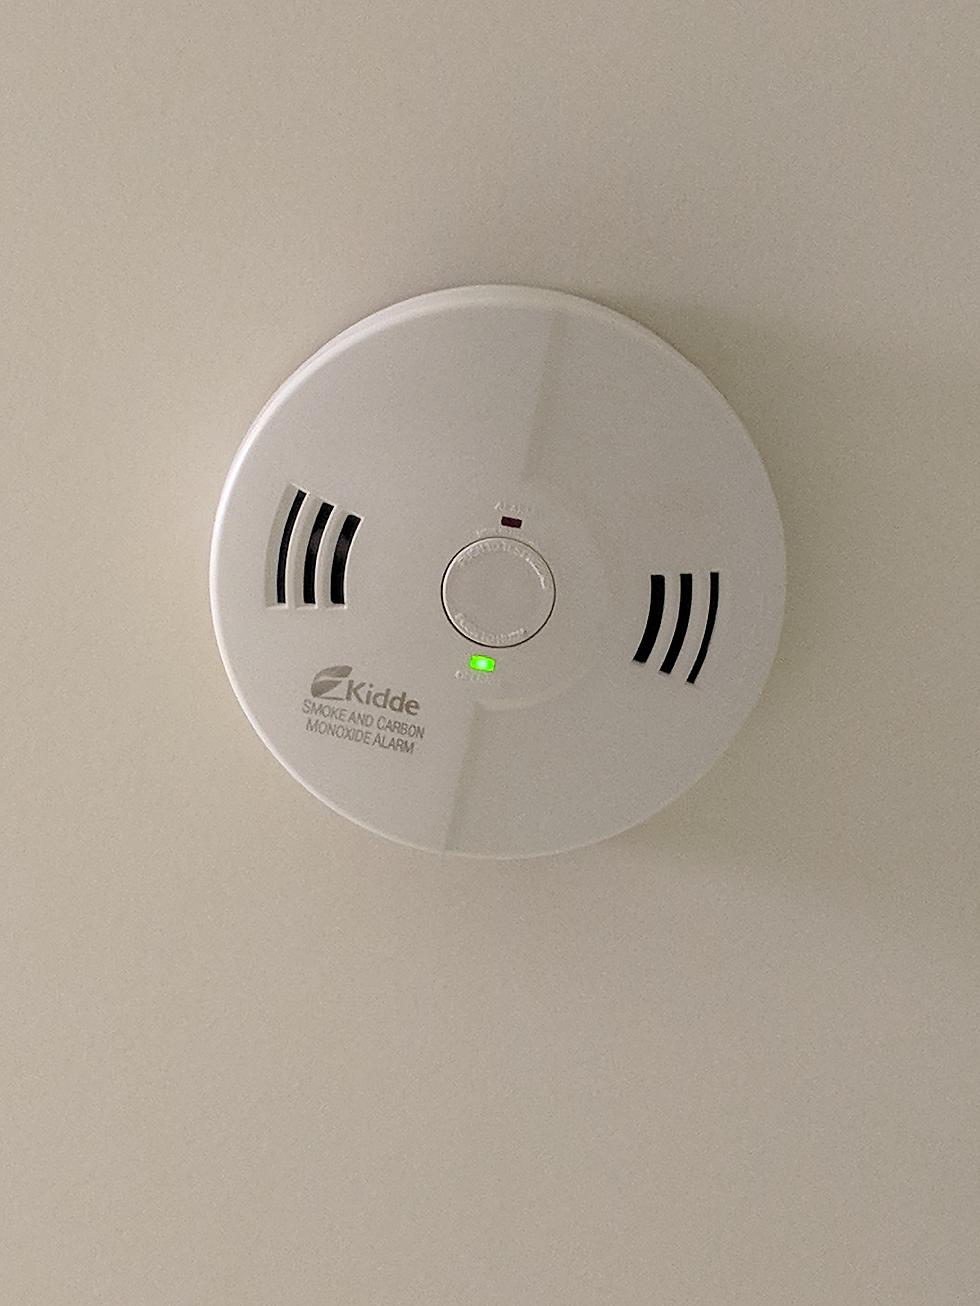 Landlord? New Law, Replace Old Smoke Detectors